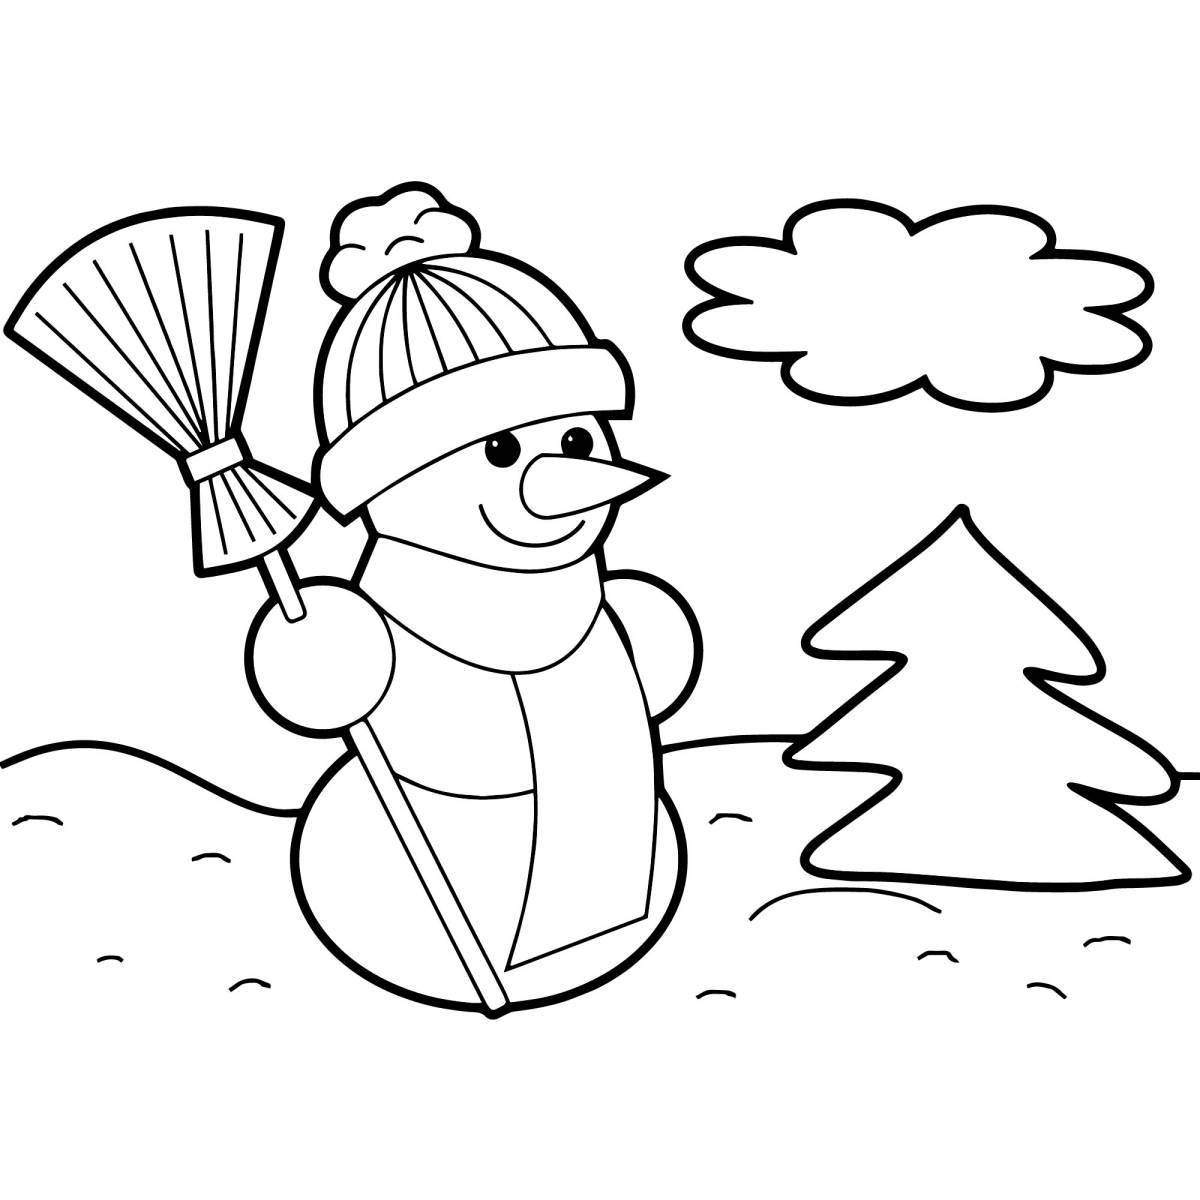 Coloring book shining tree and snowman